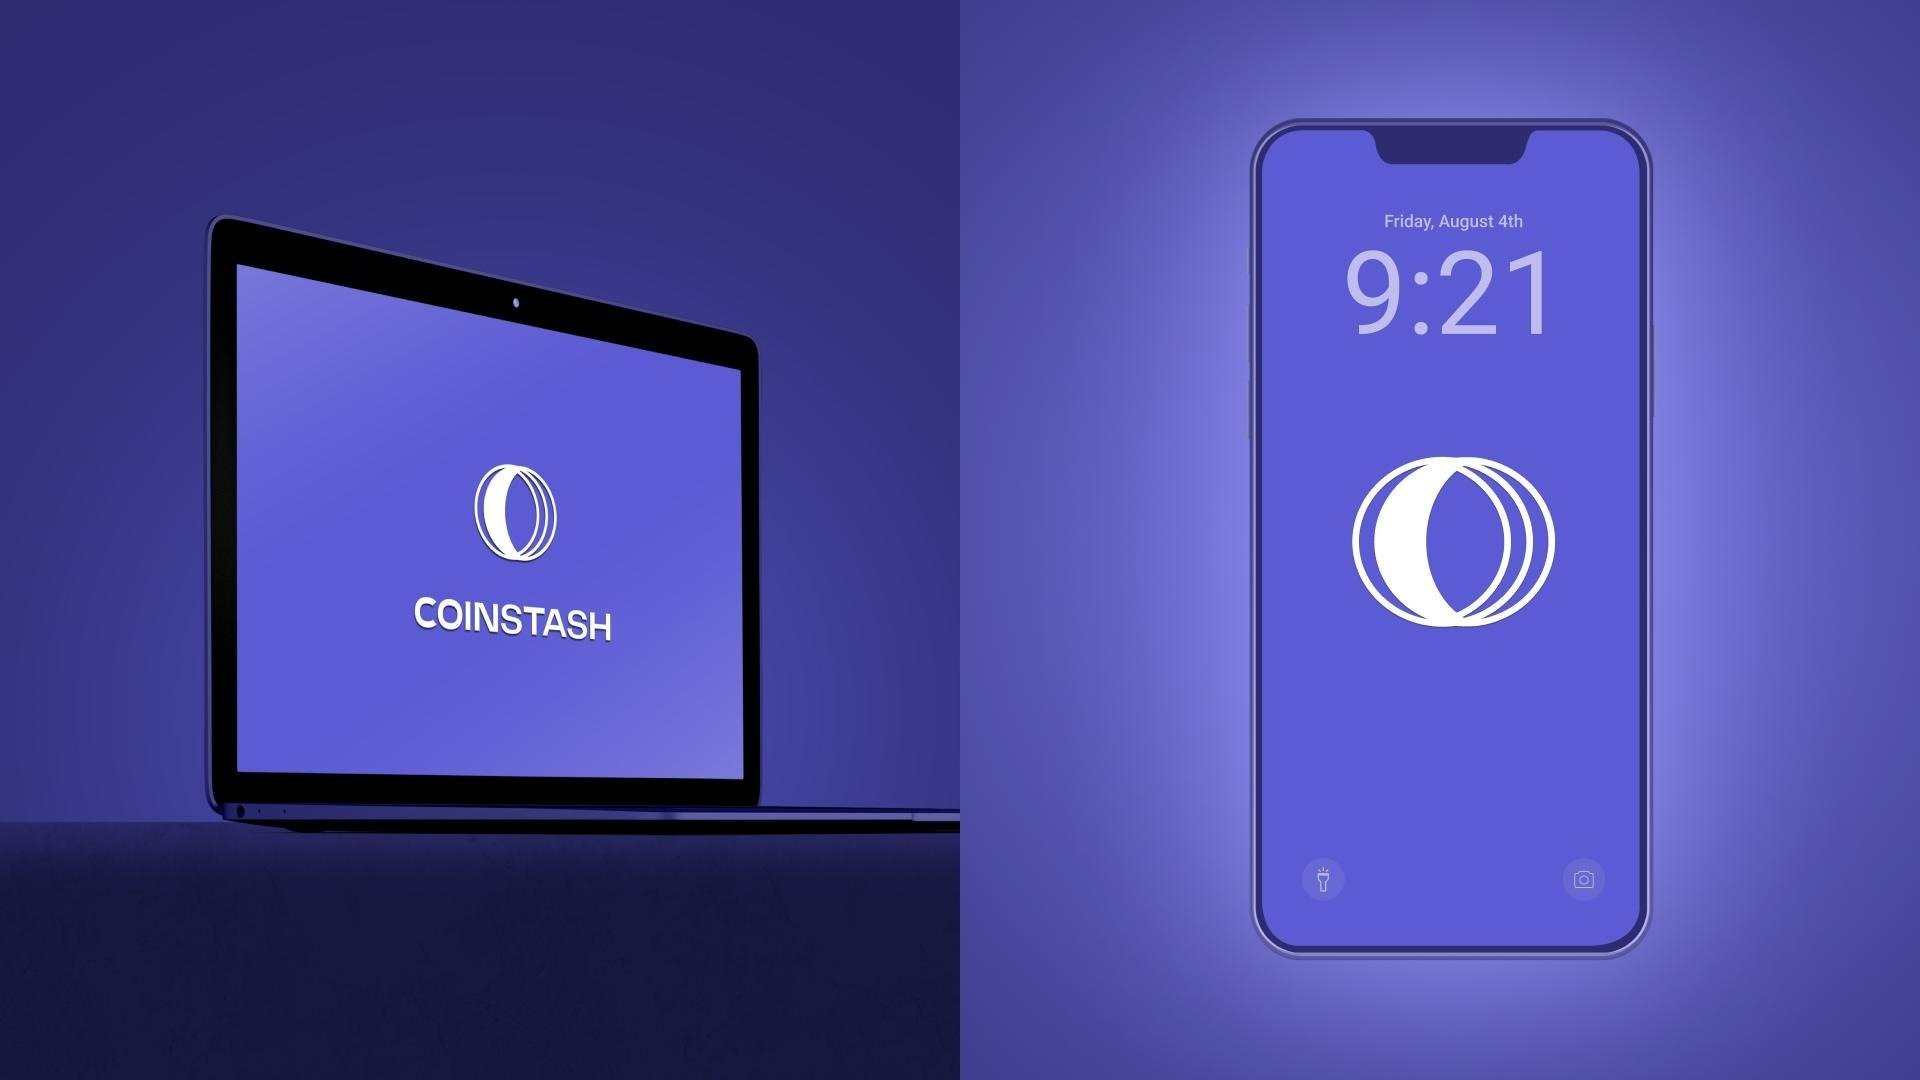 Coinstash Logo Wallpaper Purple Background with Laptop and Mobile View